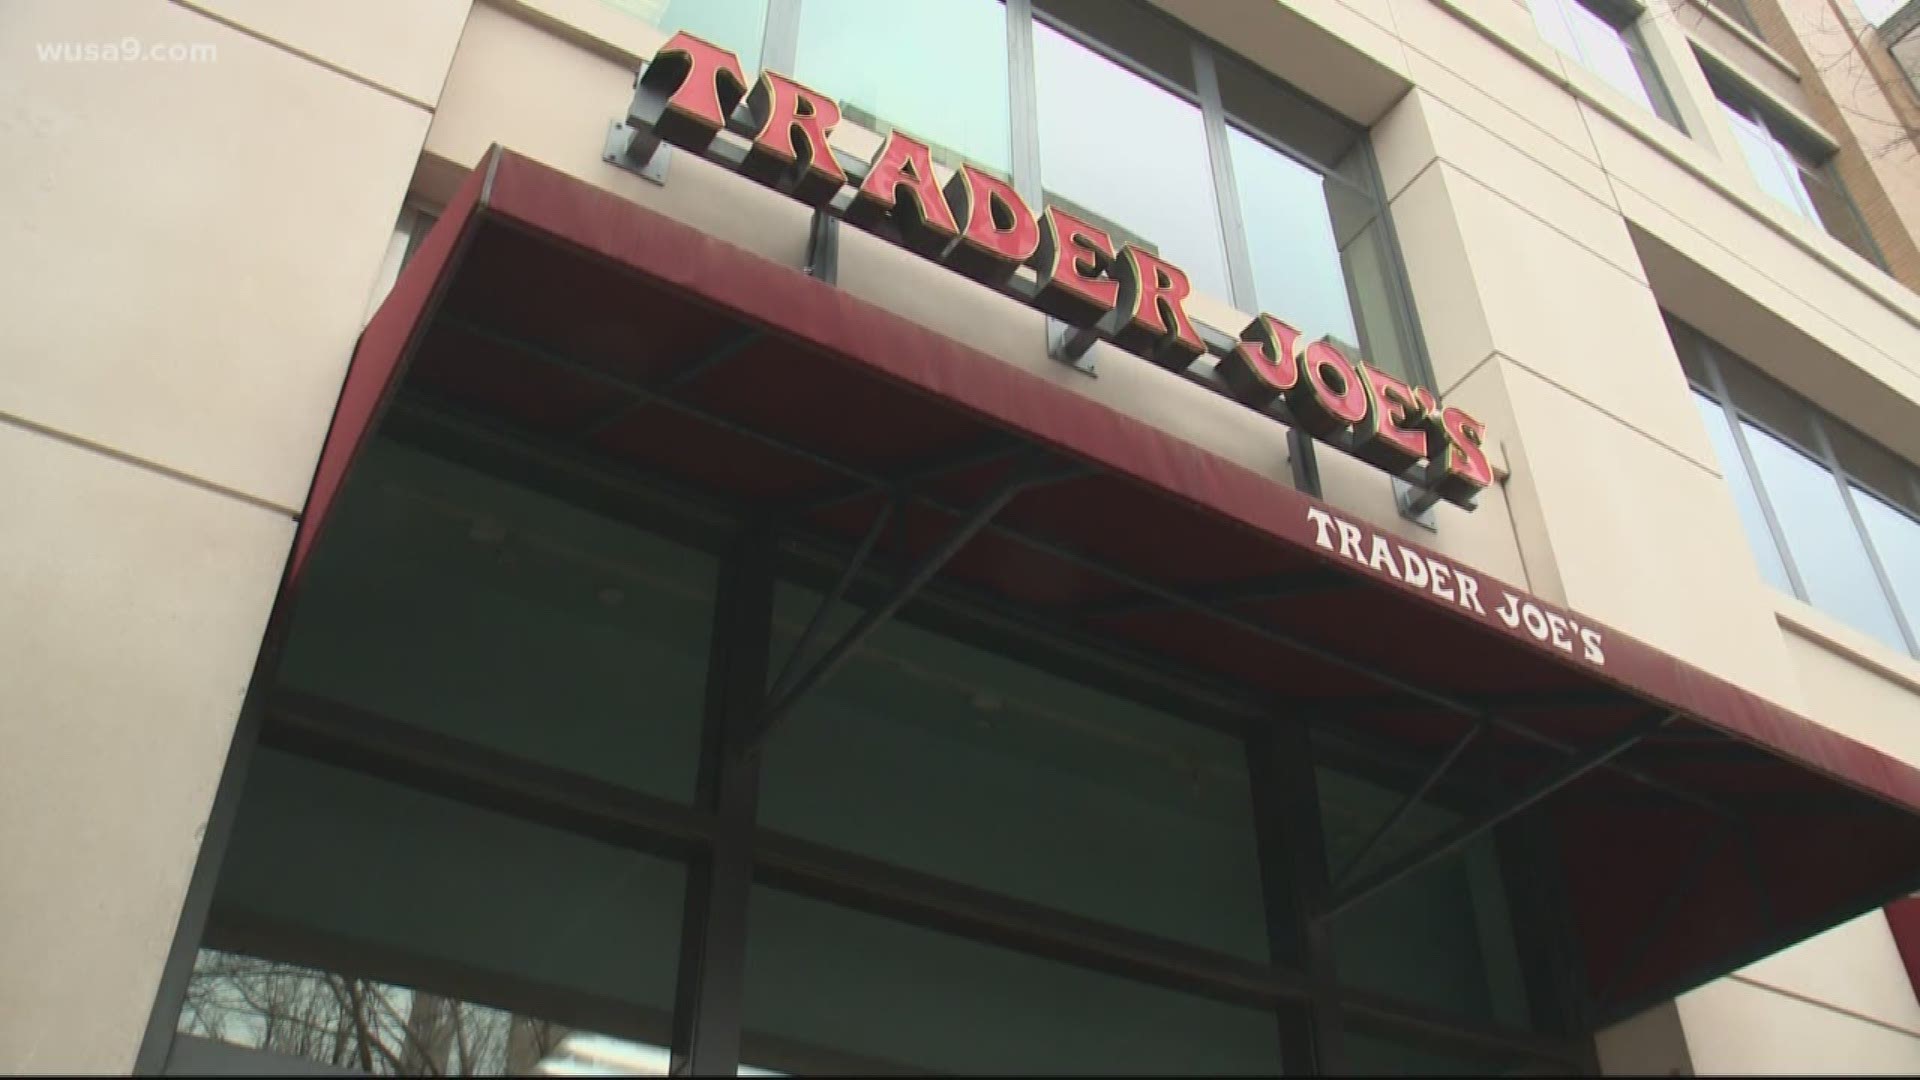 Trader Joe’s says they will continue to pay all Crew Members for their scheduled shifts.